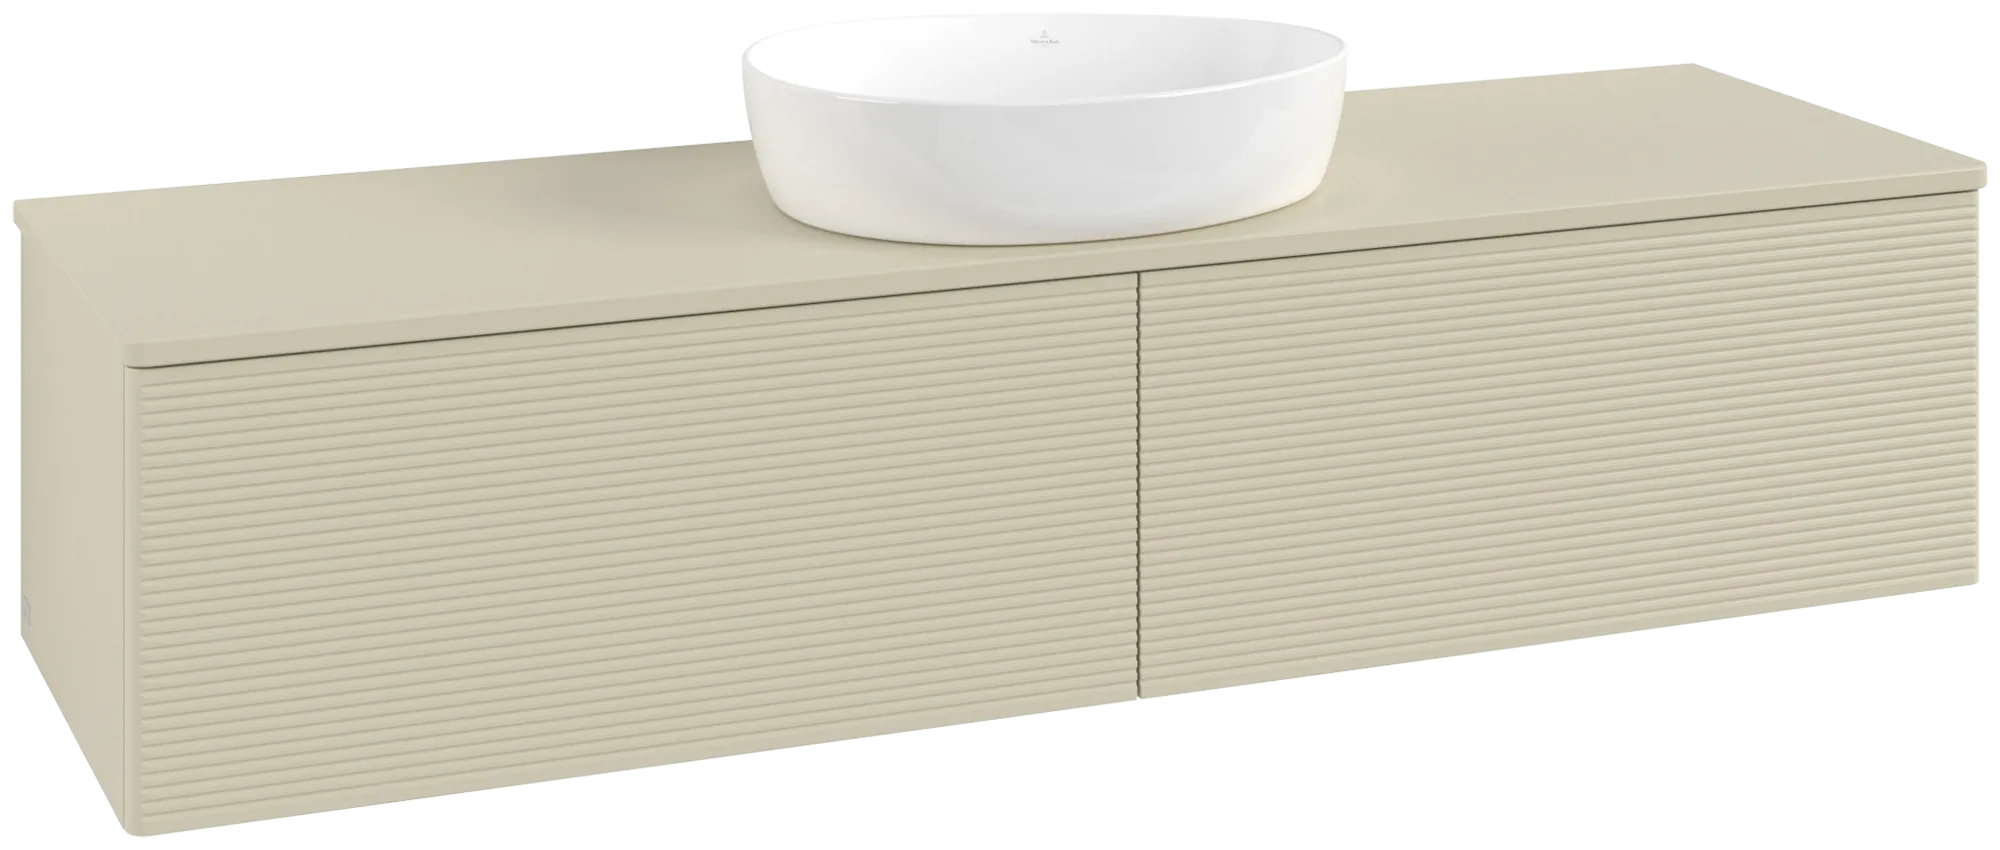 Picture of VILLEROY BOCH Antao Vanity unit, with lighting, 2 pull-out compartments, 1600 x 360 x 500 mm, Front with grain texture, Silk Grey Matt Lacquer / Silk Grey Matt Lacquer #L36110HJ